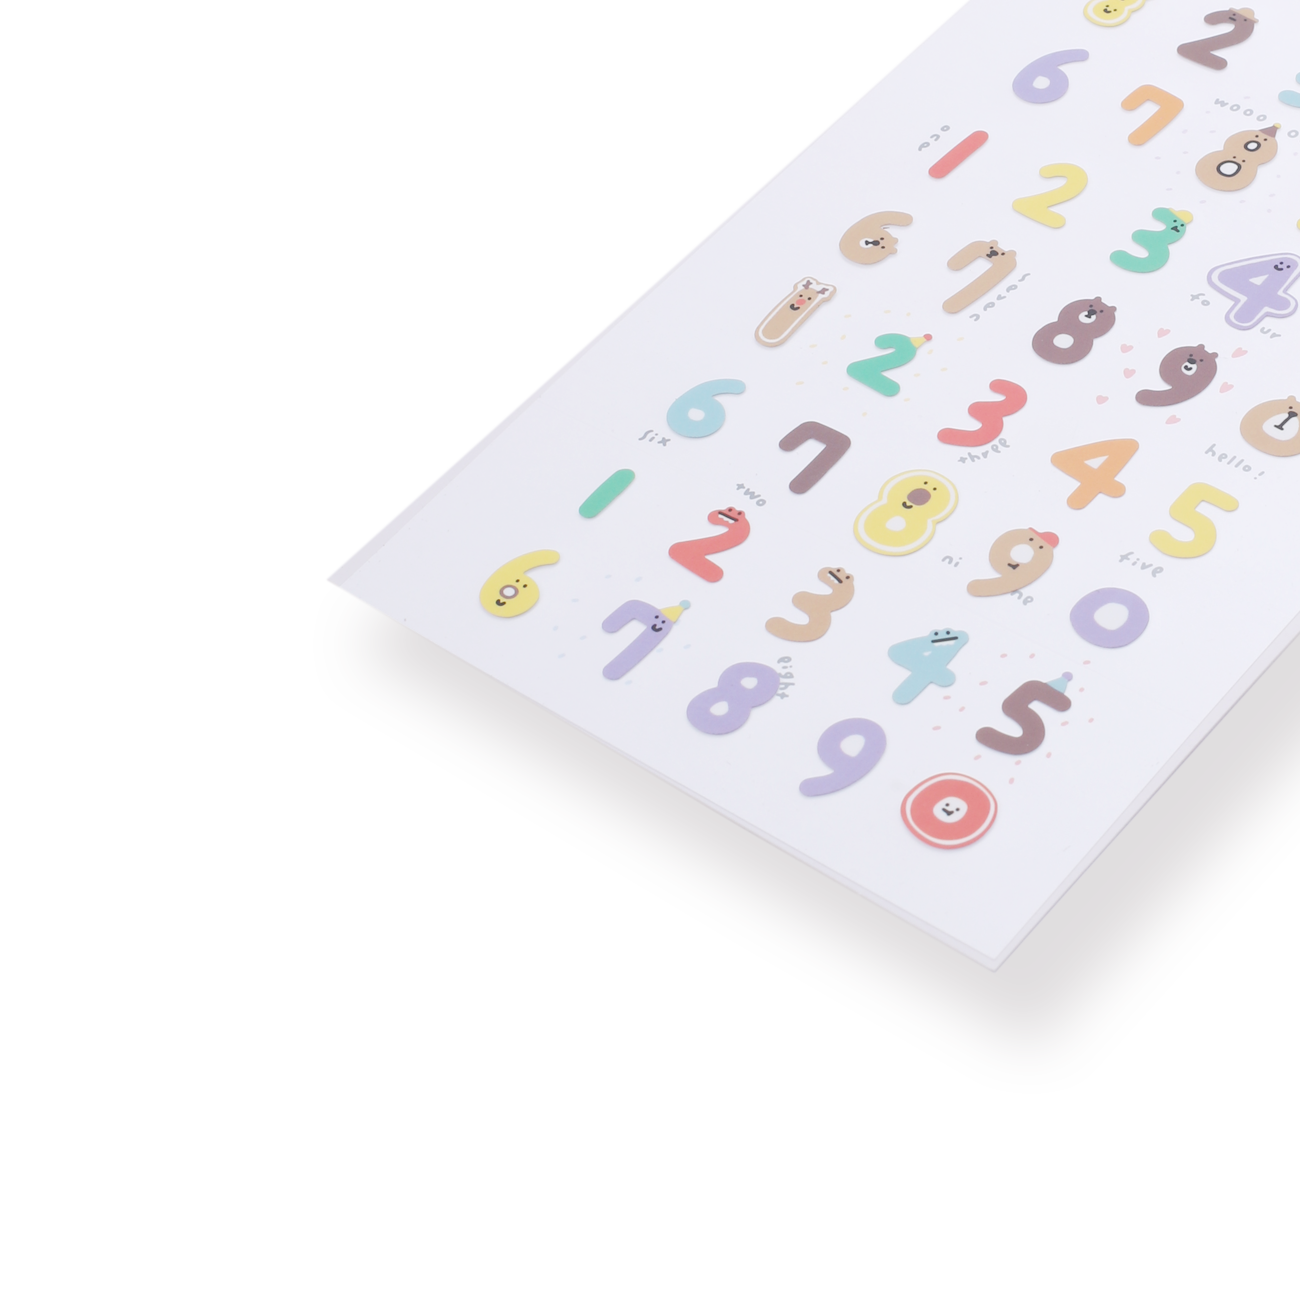 Bonito Number Stickers - Stationery Pal